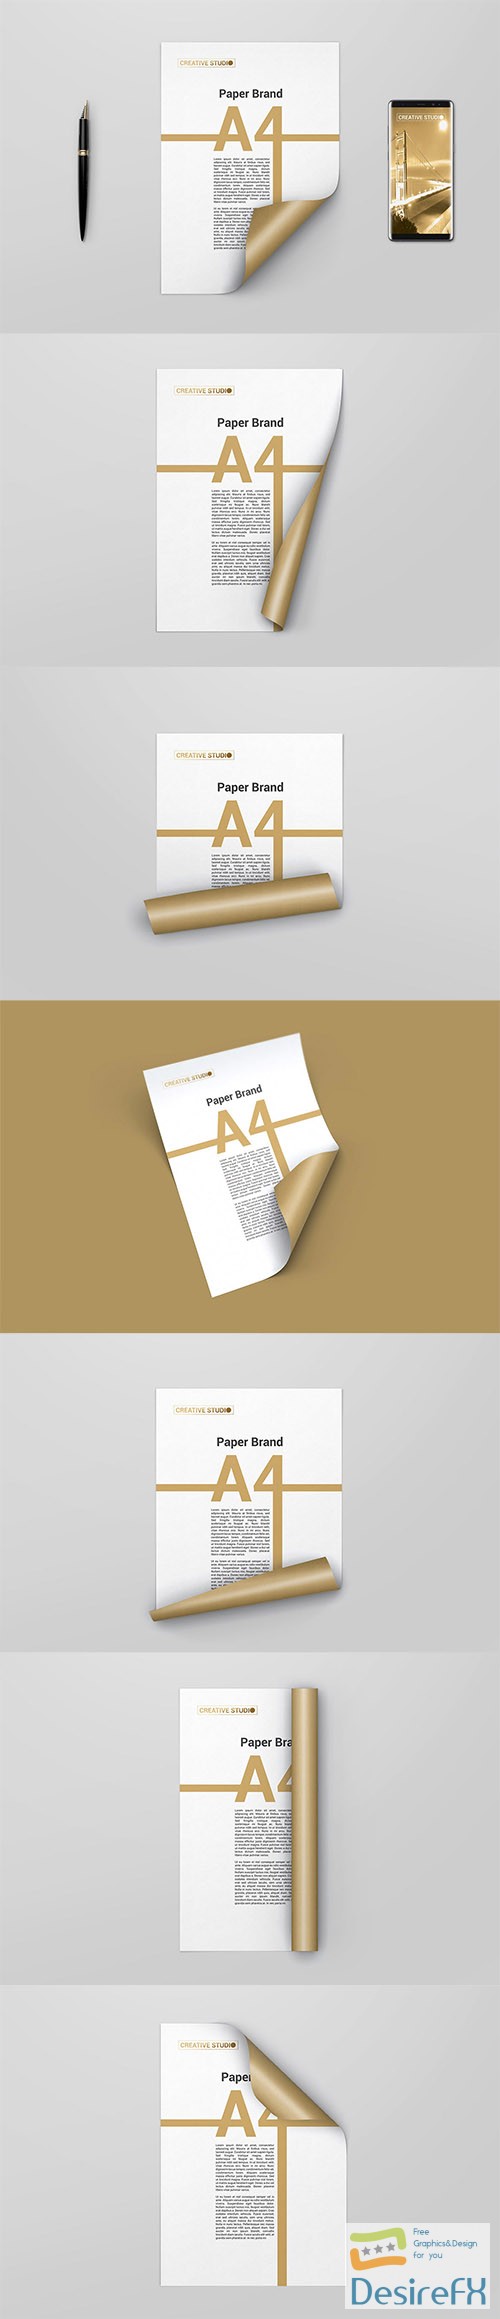 A4 Curled Paper Mockups